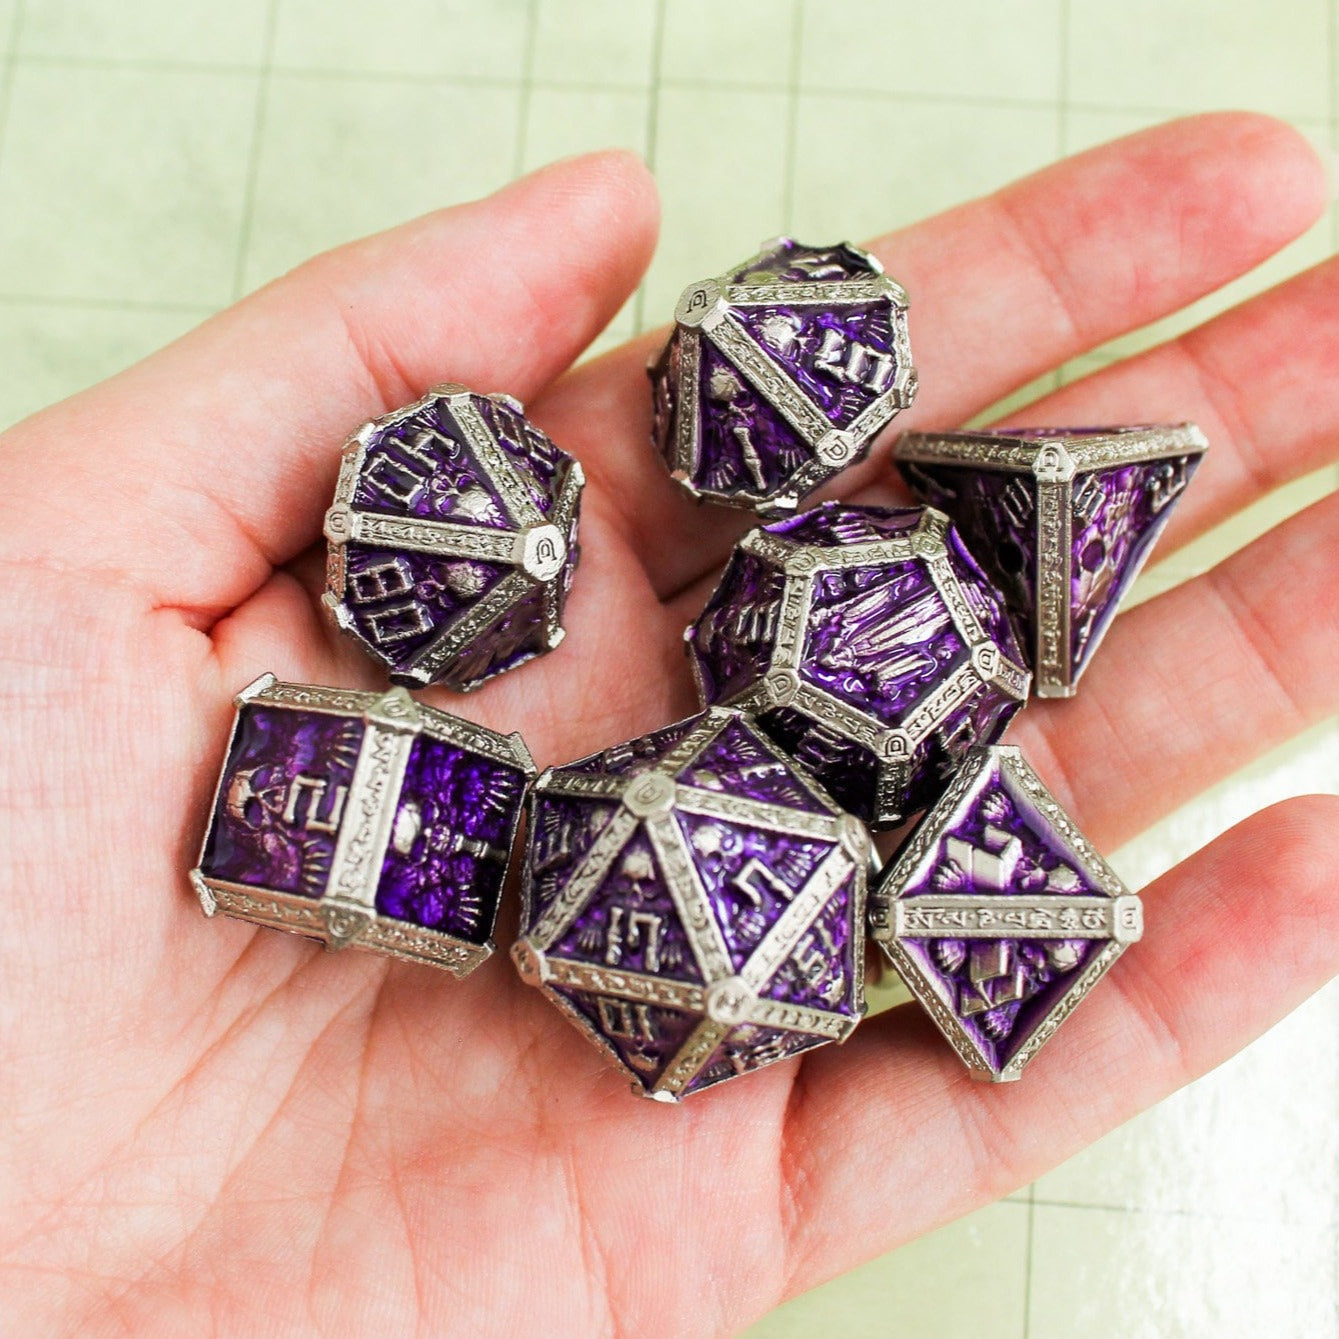 Dnd Chunky Heavy Purple Crypt RPG Metal Polyhedral DnD Skull Dice Set For Dungeons and Dragons Pathfinder Role Playing Game